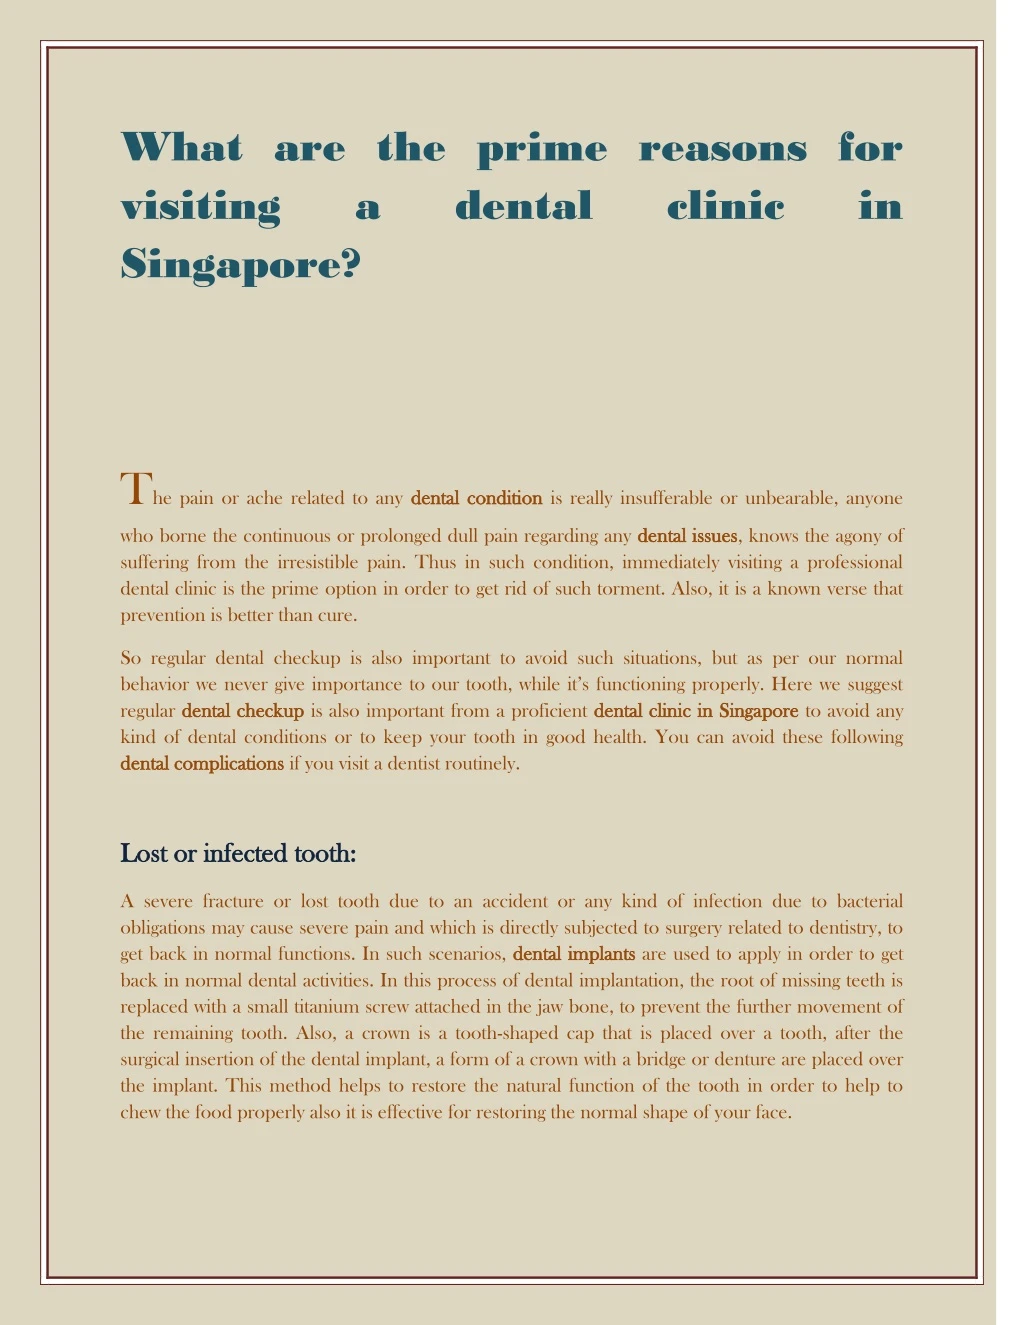 what are the prime reasons for visiting a dental